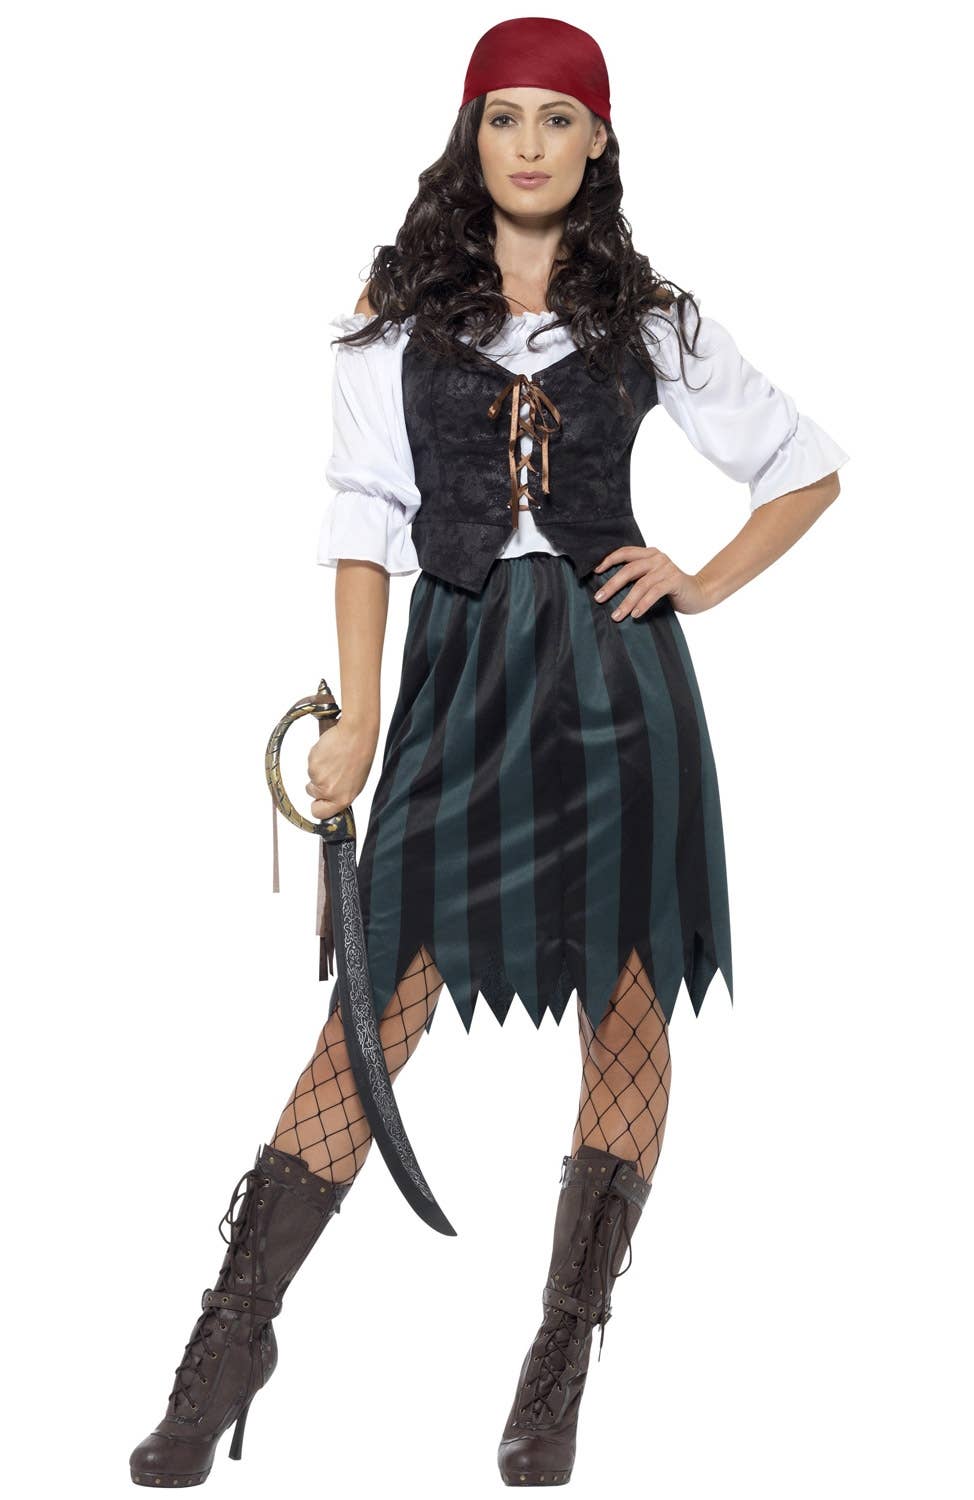 Women's Deckhand Pirate Fancy Dress Costume - Front Image